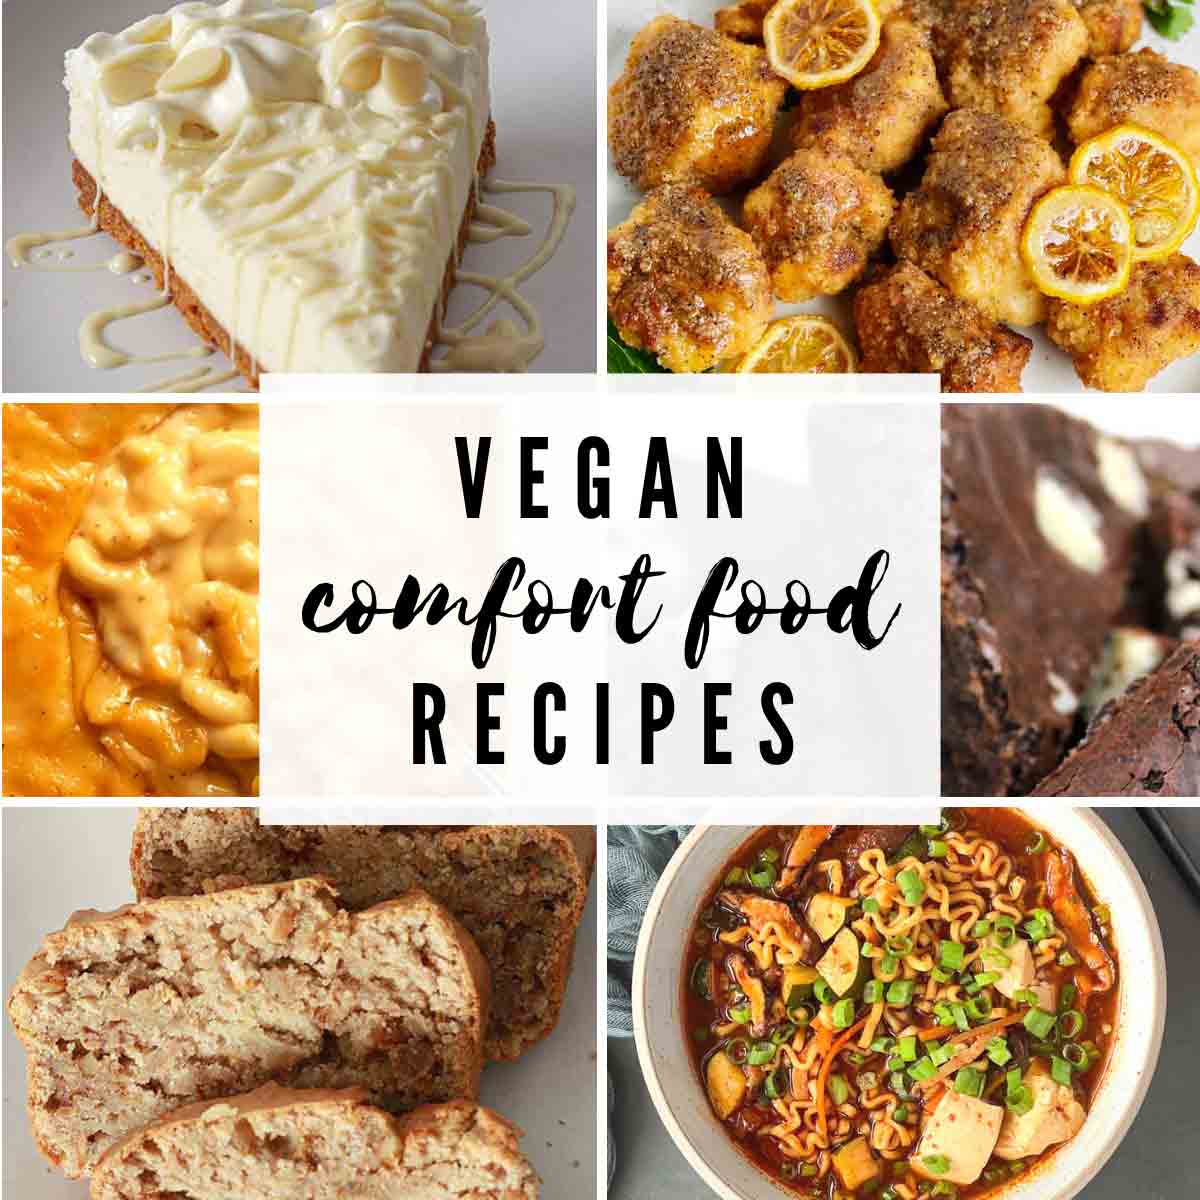 6 Vegan Comfort Food Images With Text Overlay